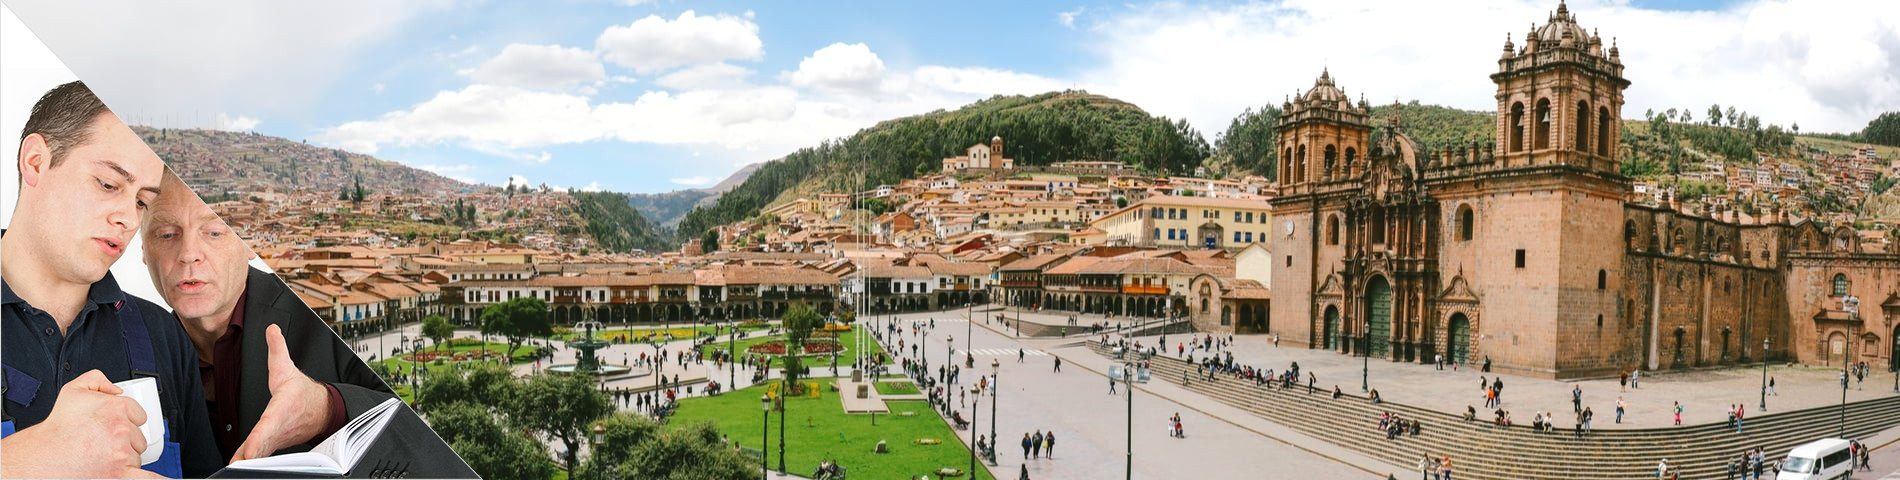 Cuzco - One-to-One